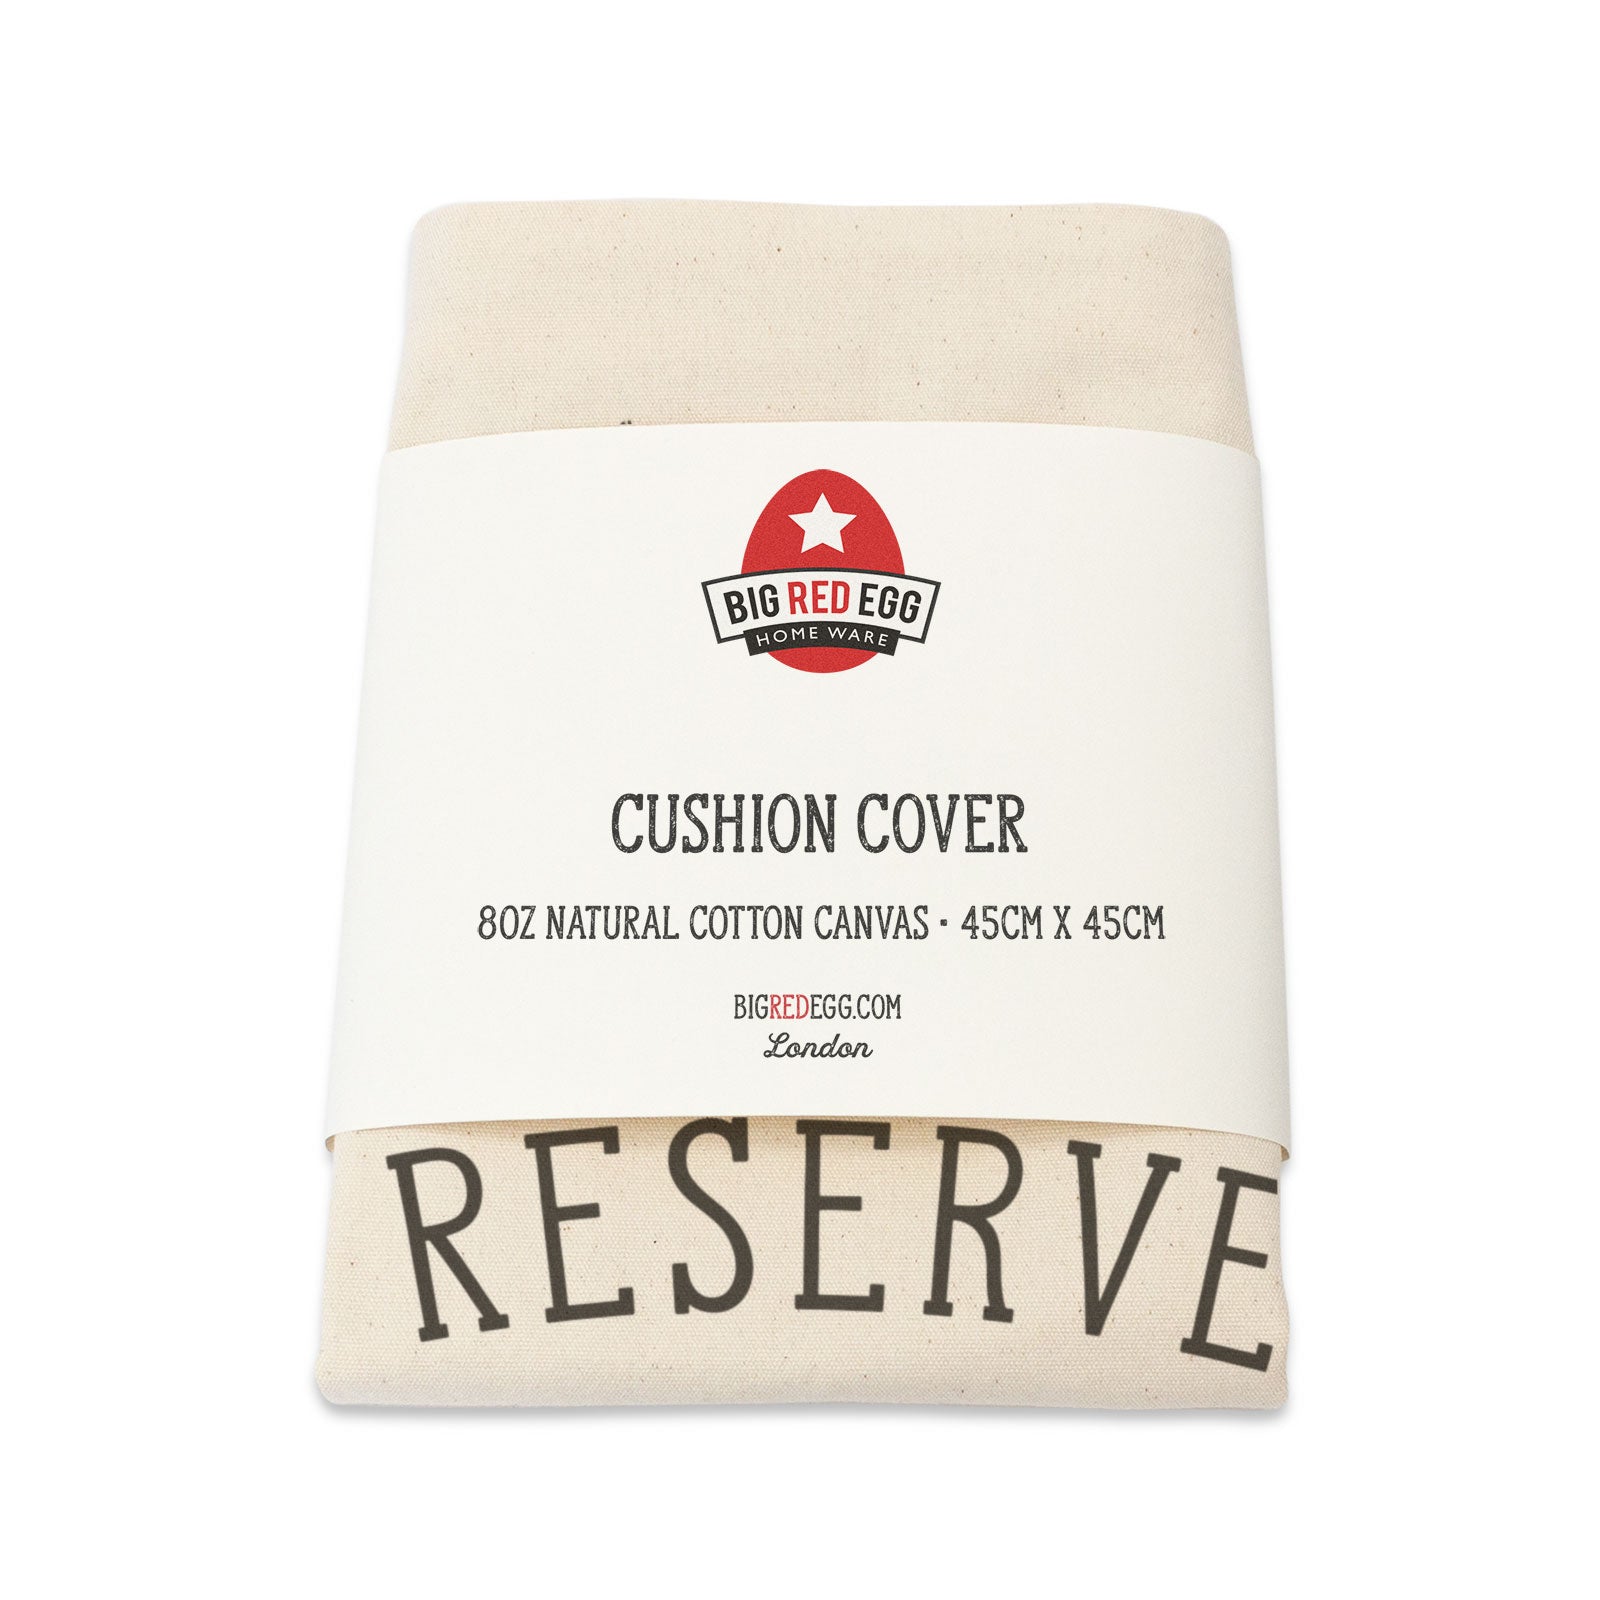 Reserved For The Belgian Shepherd Cushion Cover